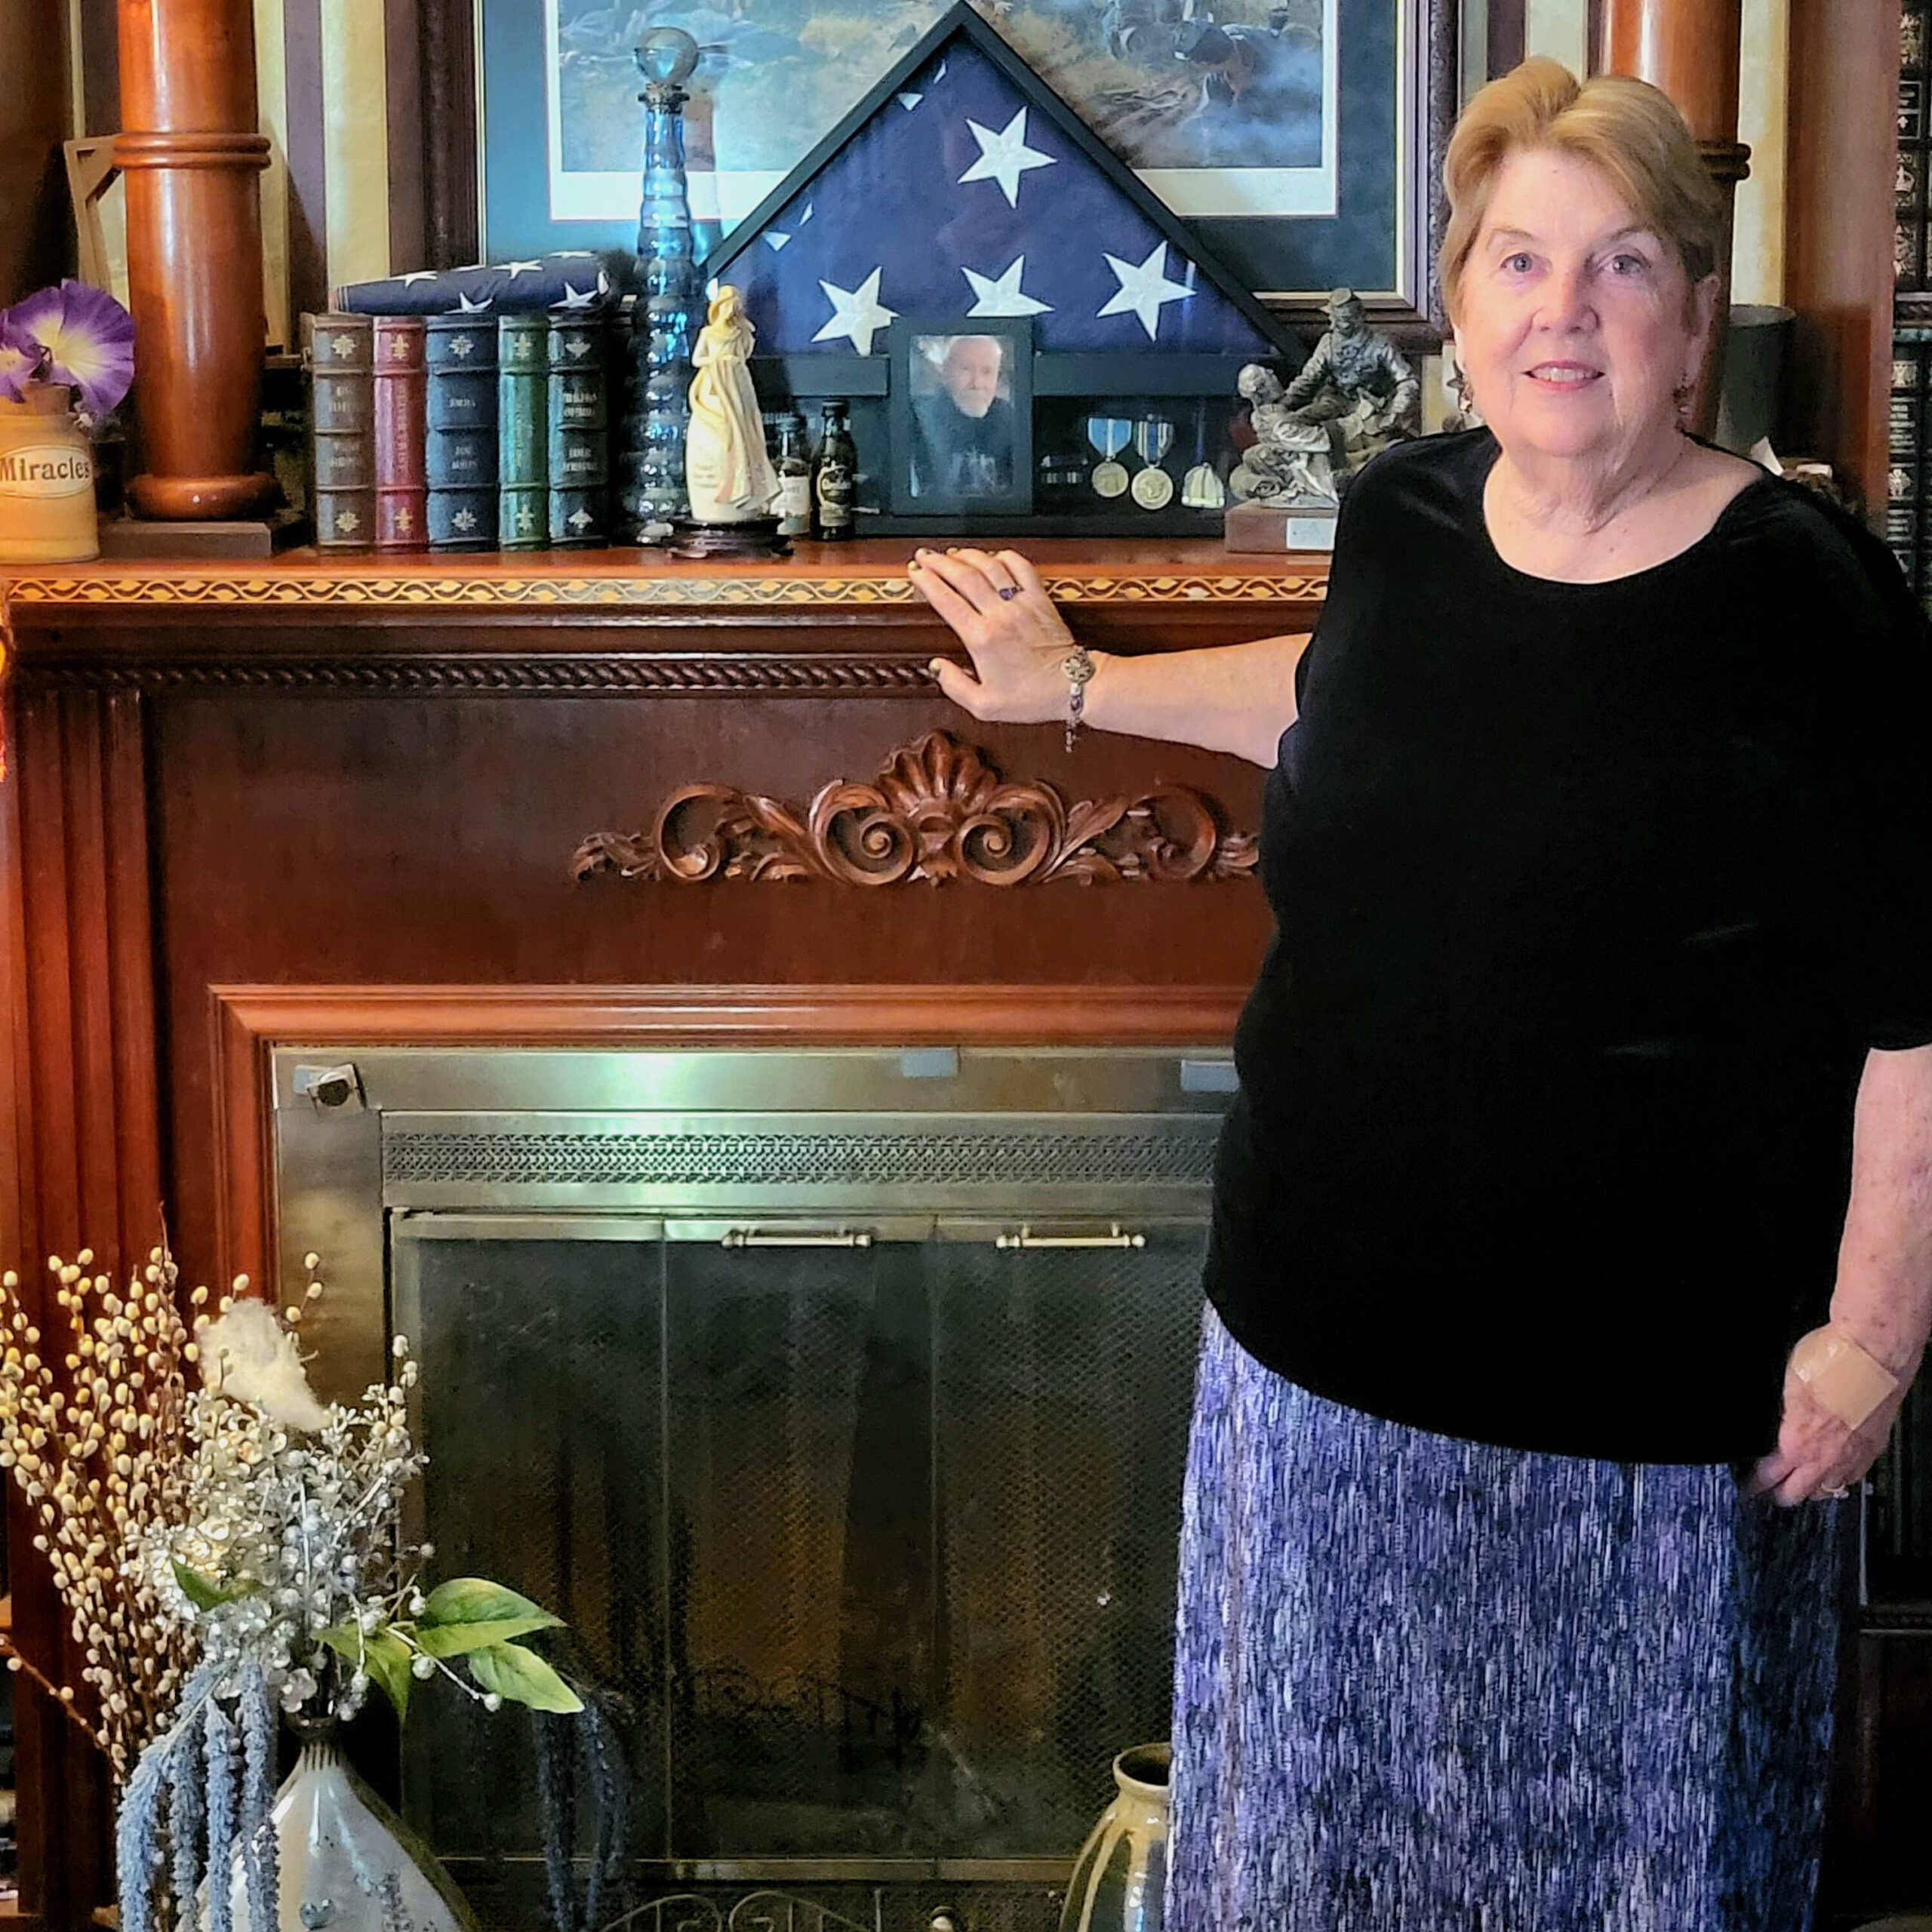 Ruth standing by Fireplace facade